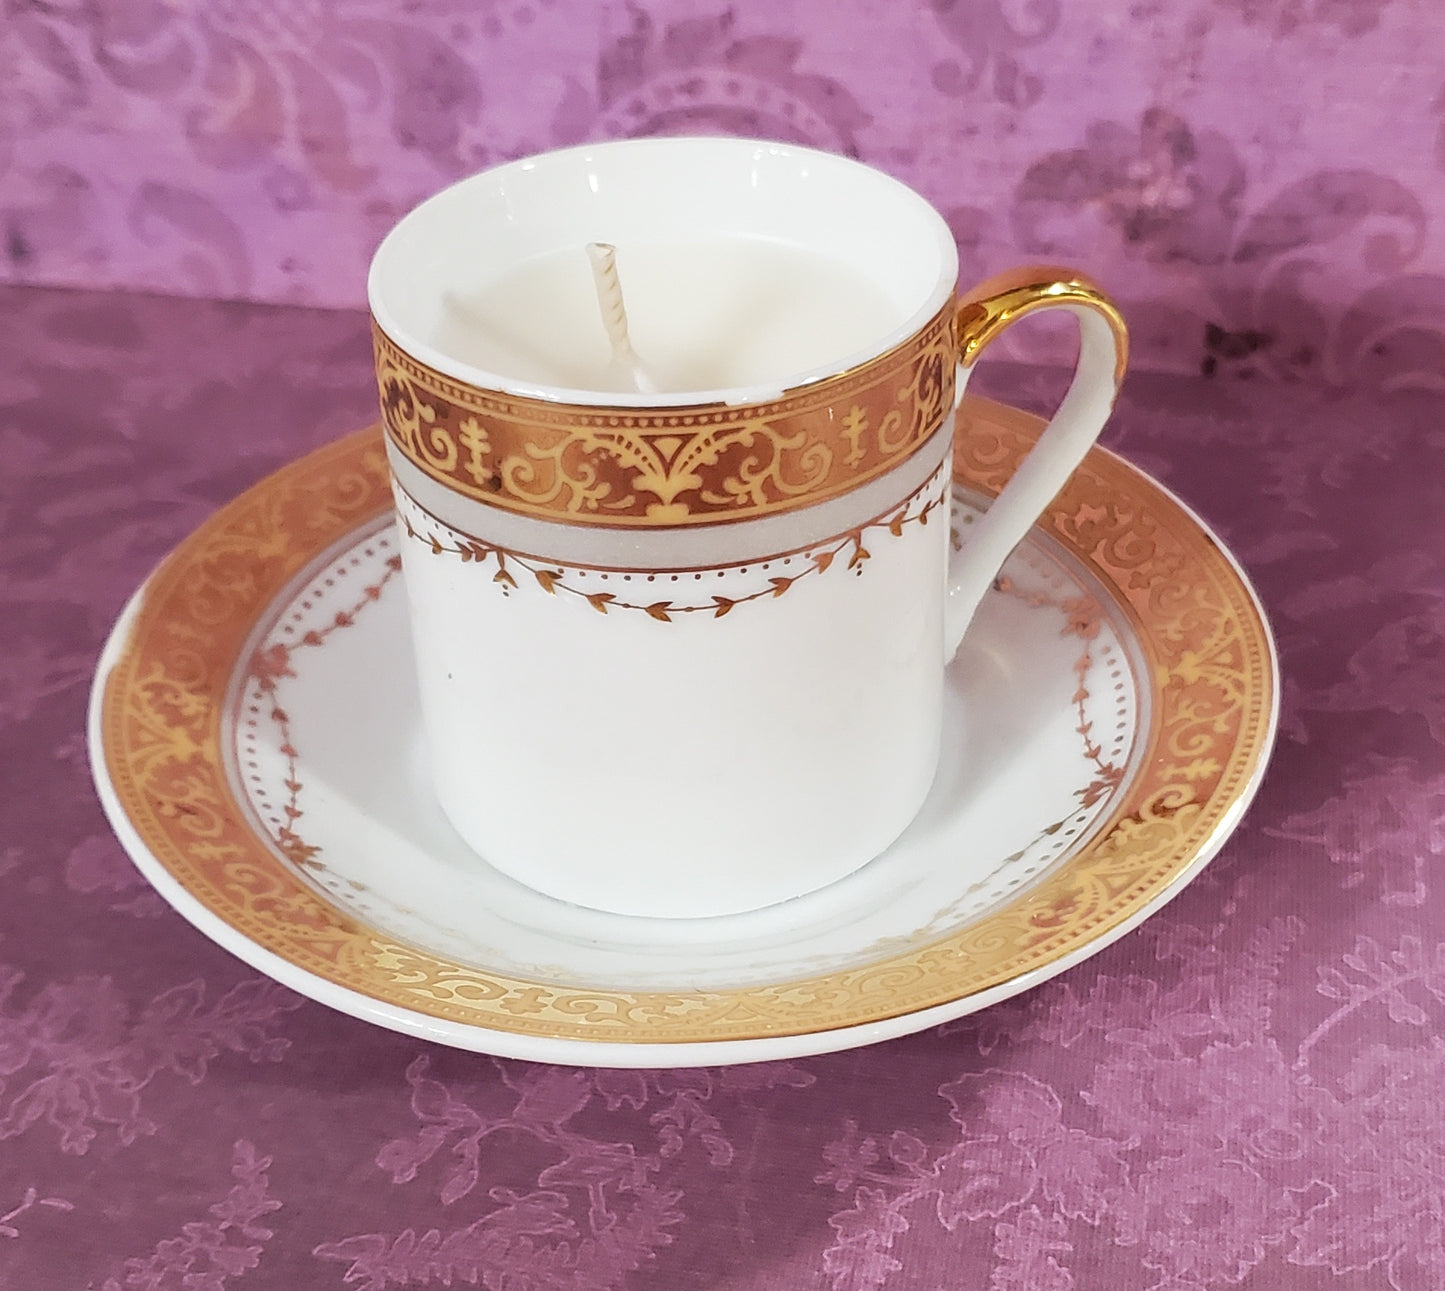 Gold Trim Vintage Cup & Saucer Set - Upcycled Candle